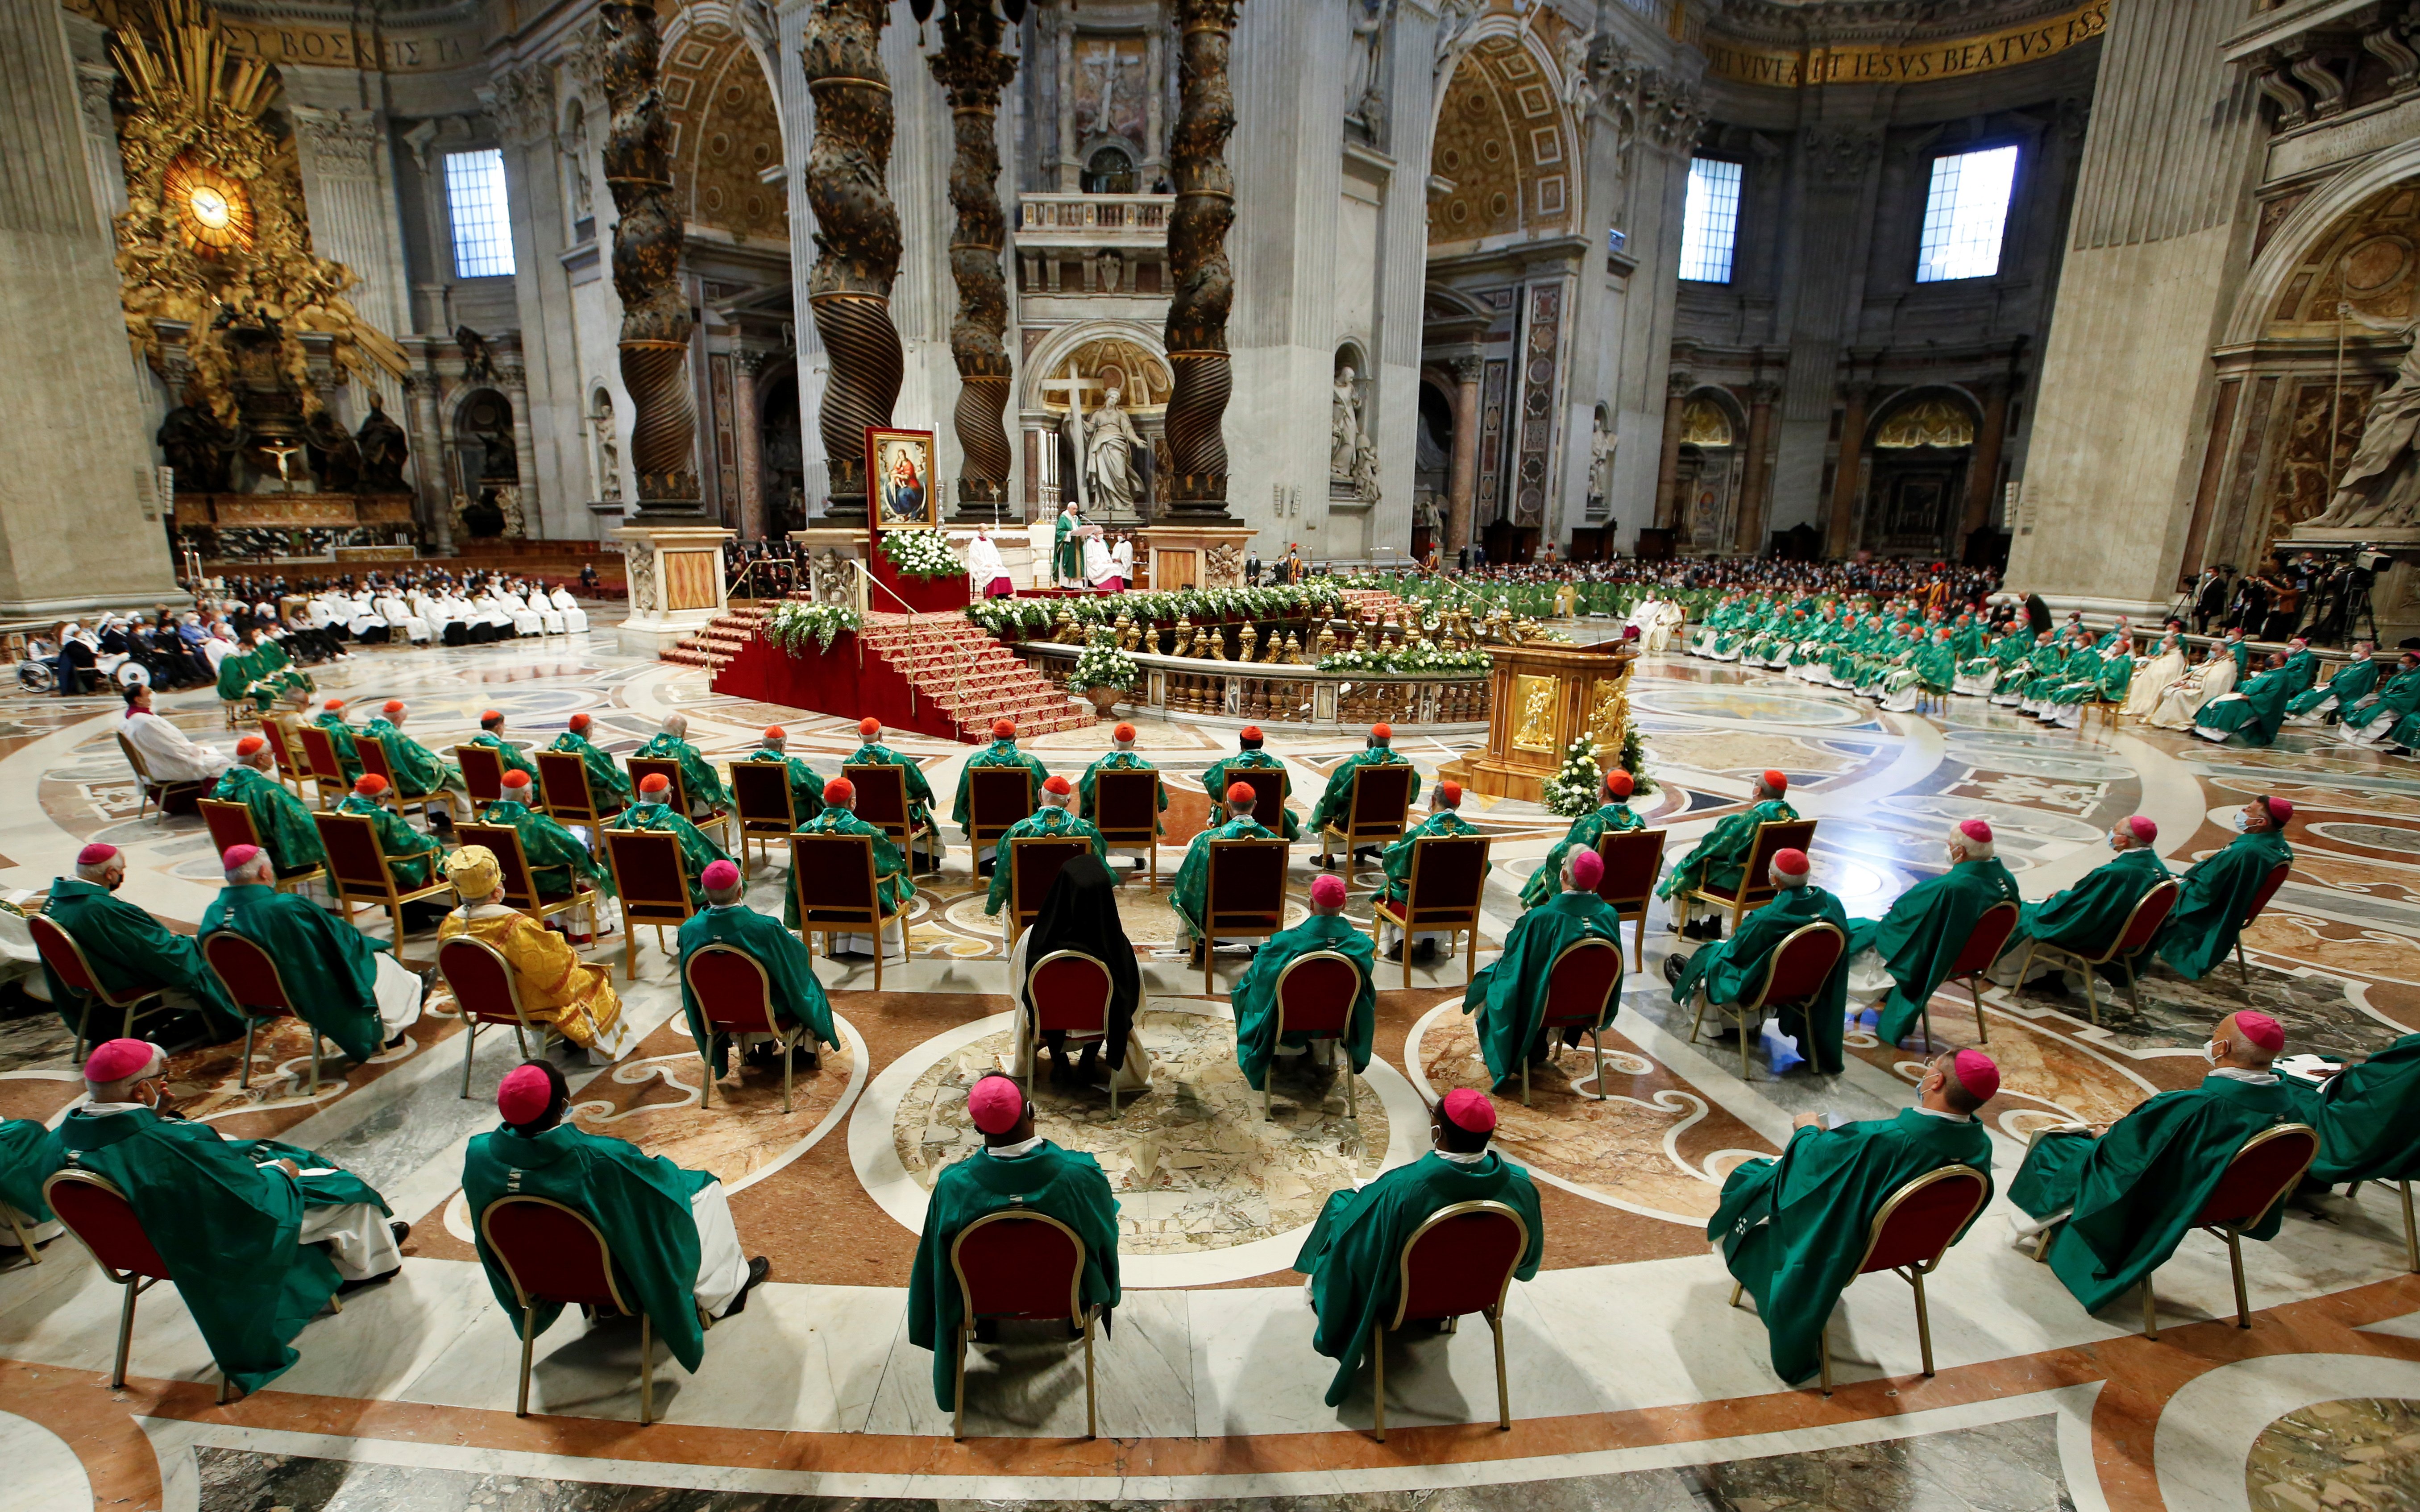 Pope Francis opens synod, church to master the 'art of encounter' | National Catholic Reporter